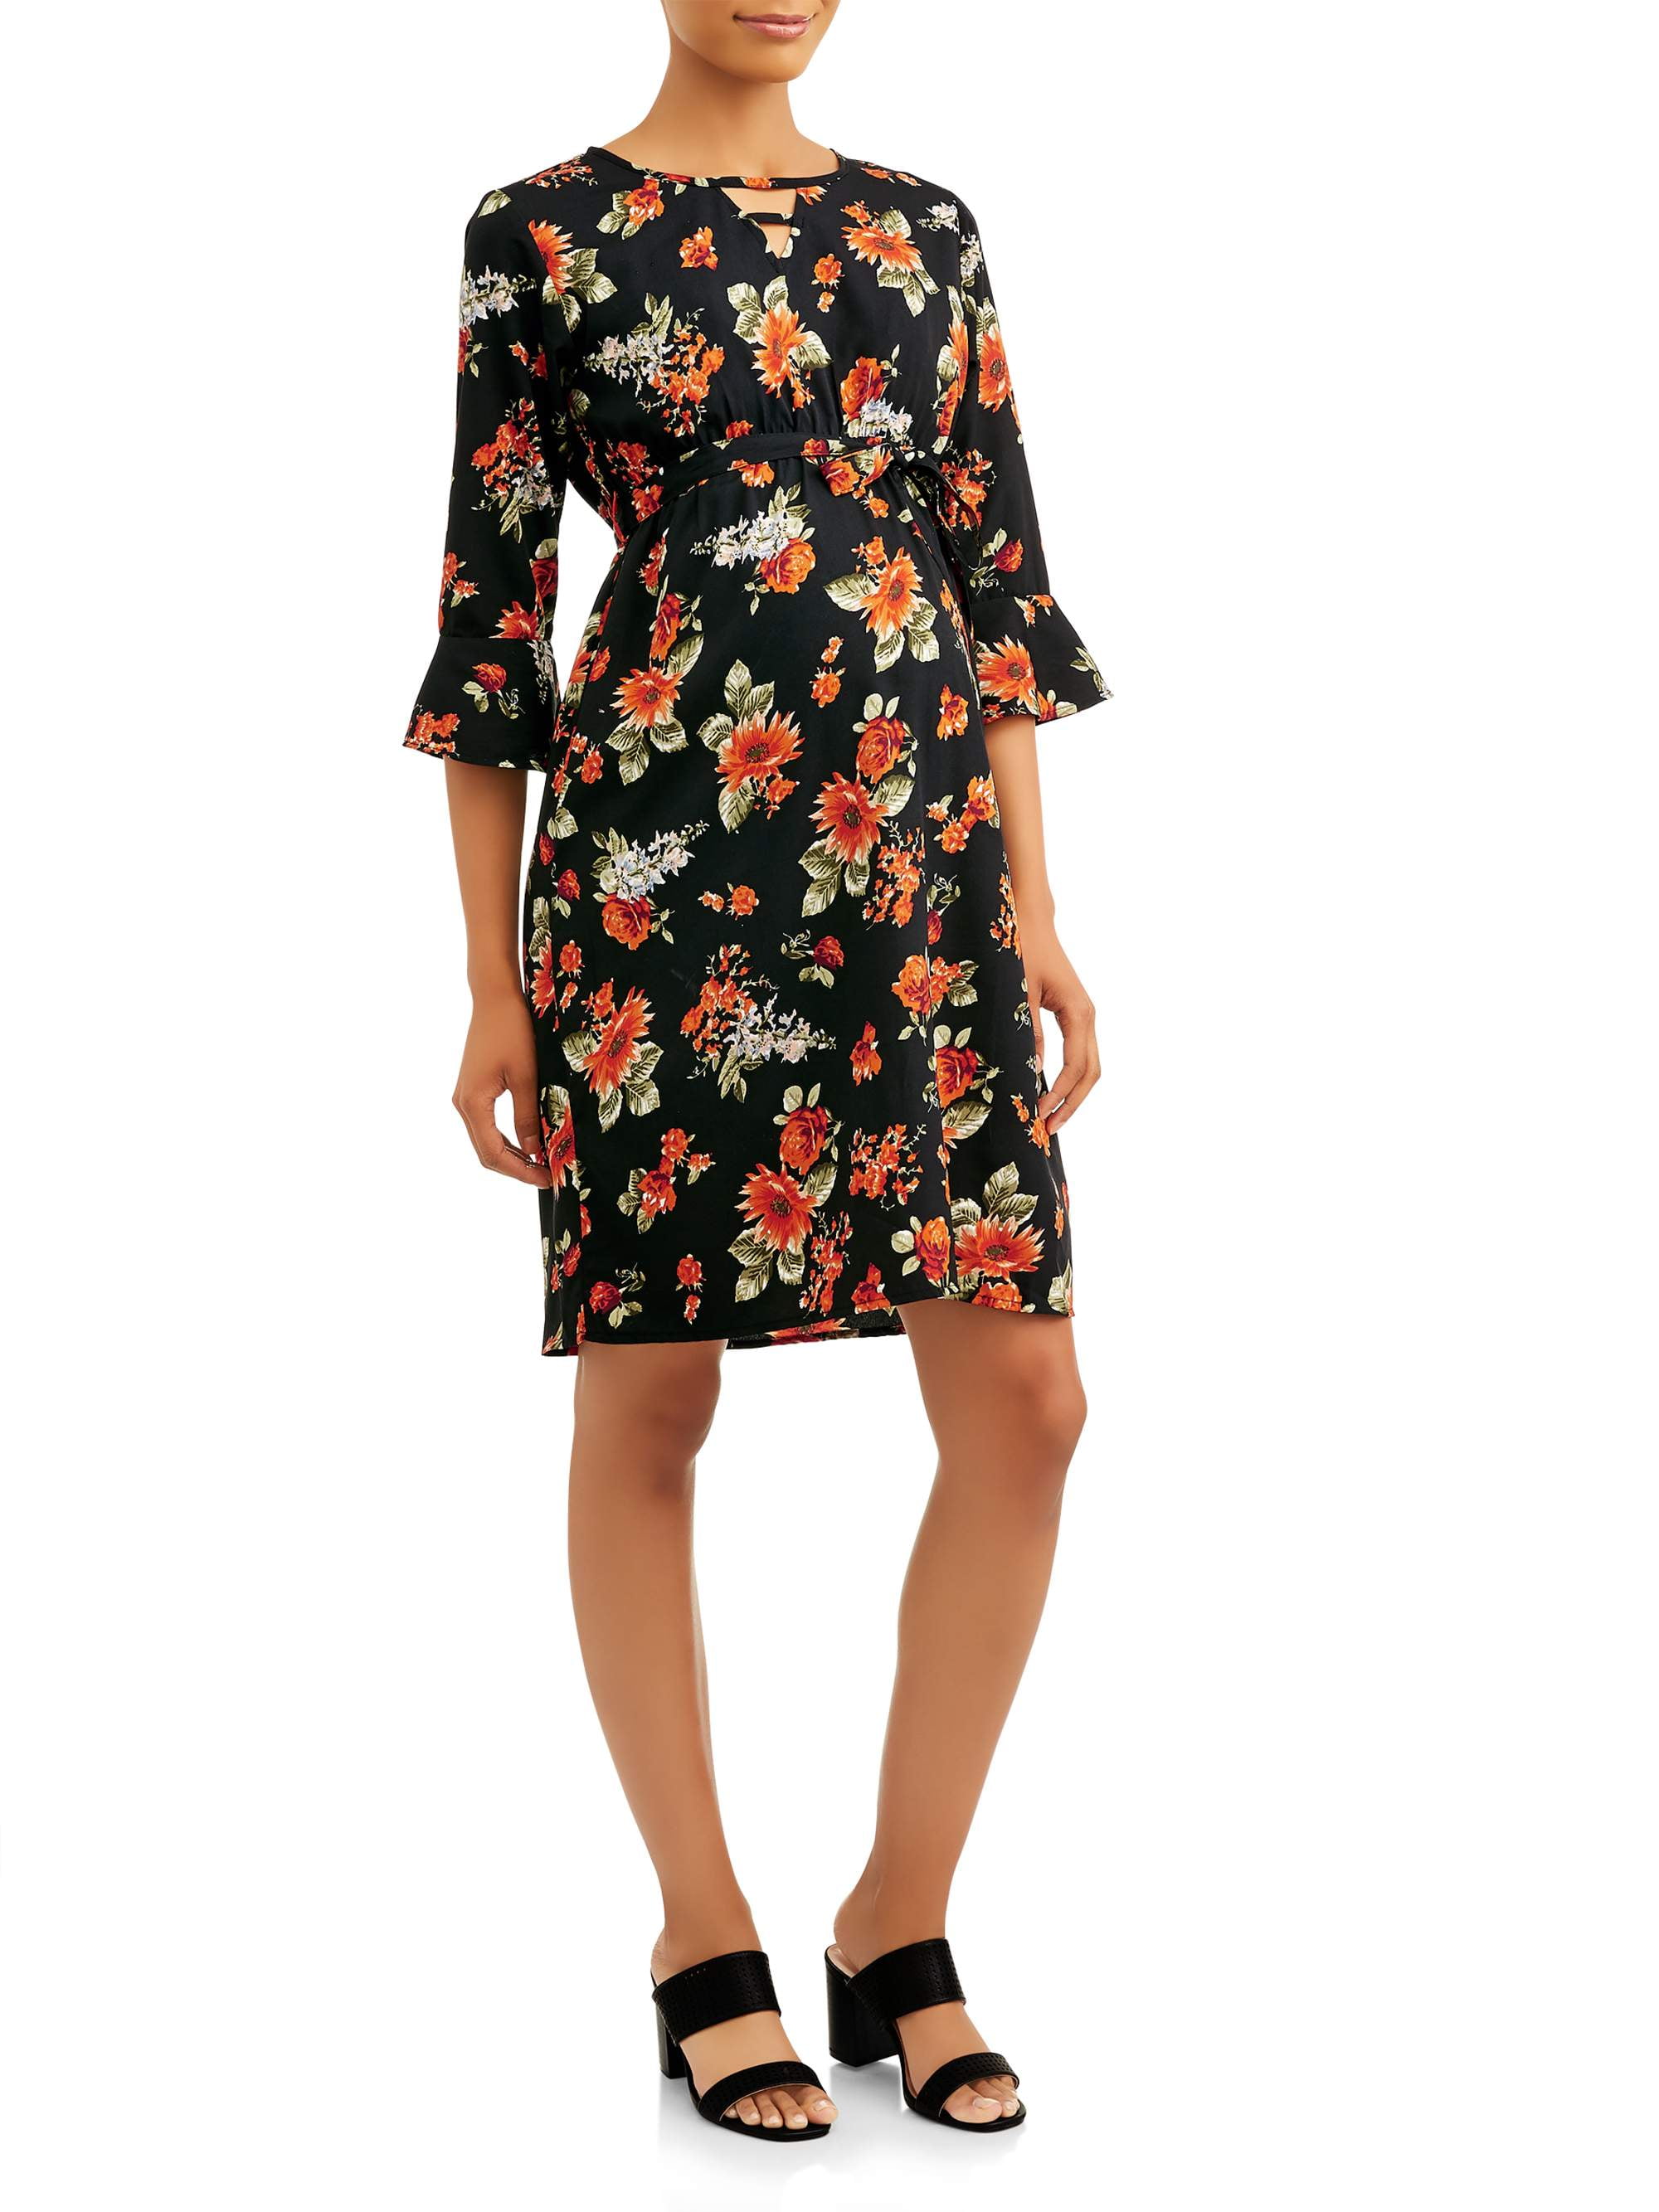 Maternity Oh! Mamma Bodycon Daytime Floral Dress with Tie front ...